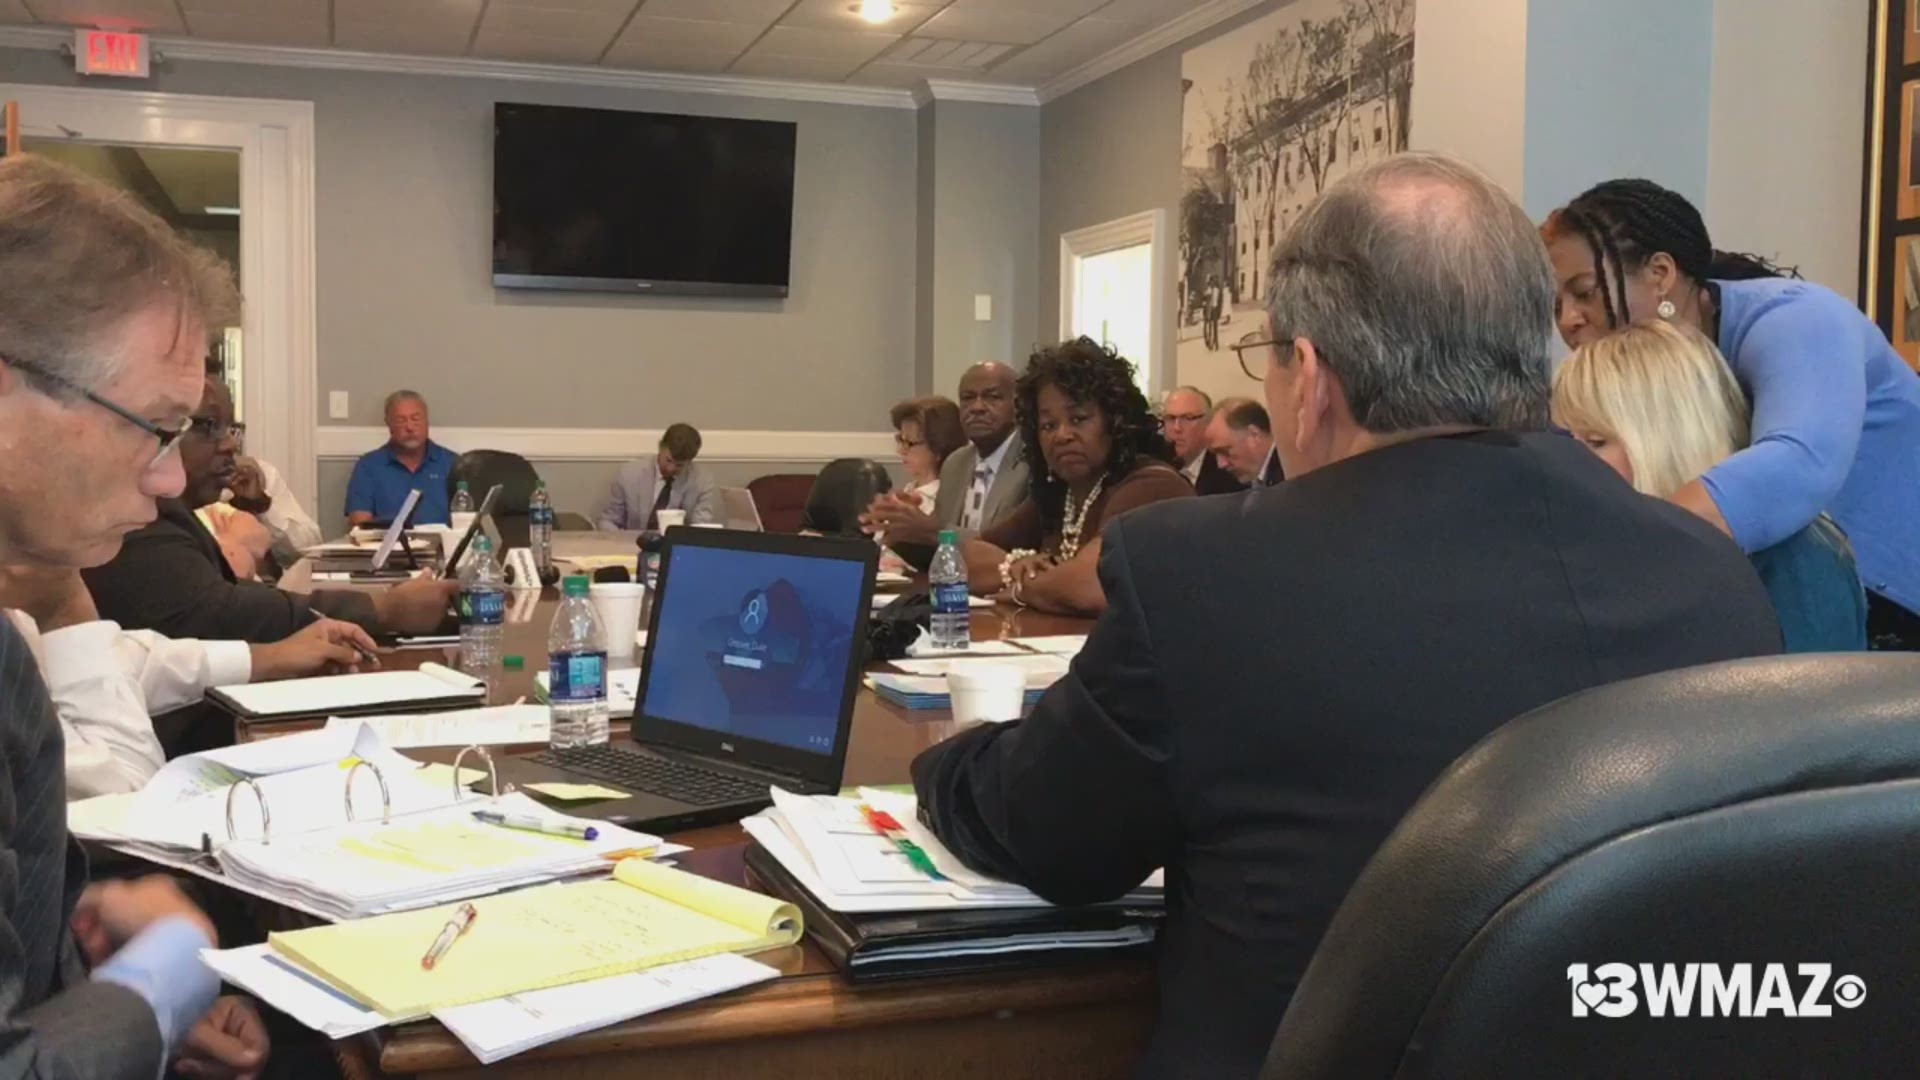 Mayor Reichert estimates it would cost $14 million from the county’s SPLOST to pay the Macon Water Authority to fix the storm water system after it was cited by the EPA for 40 violations